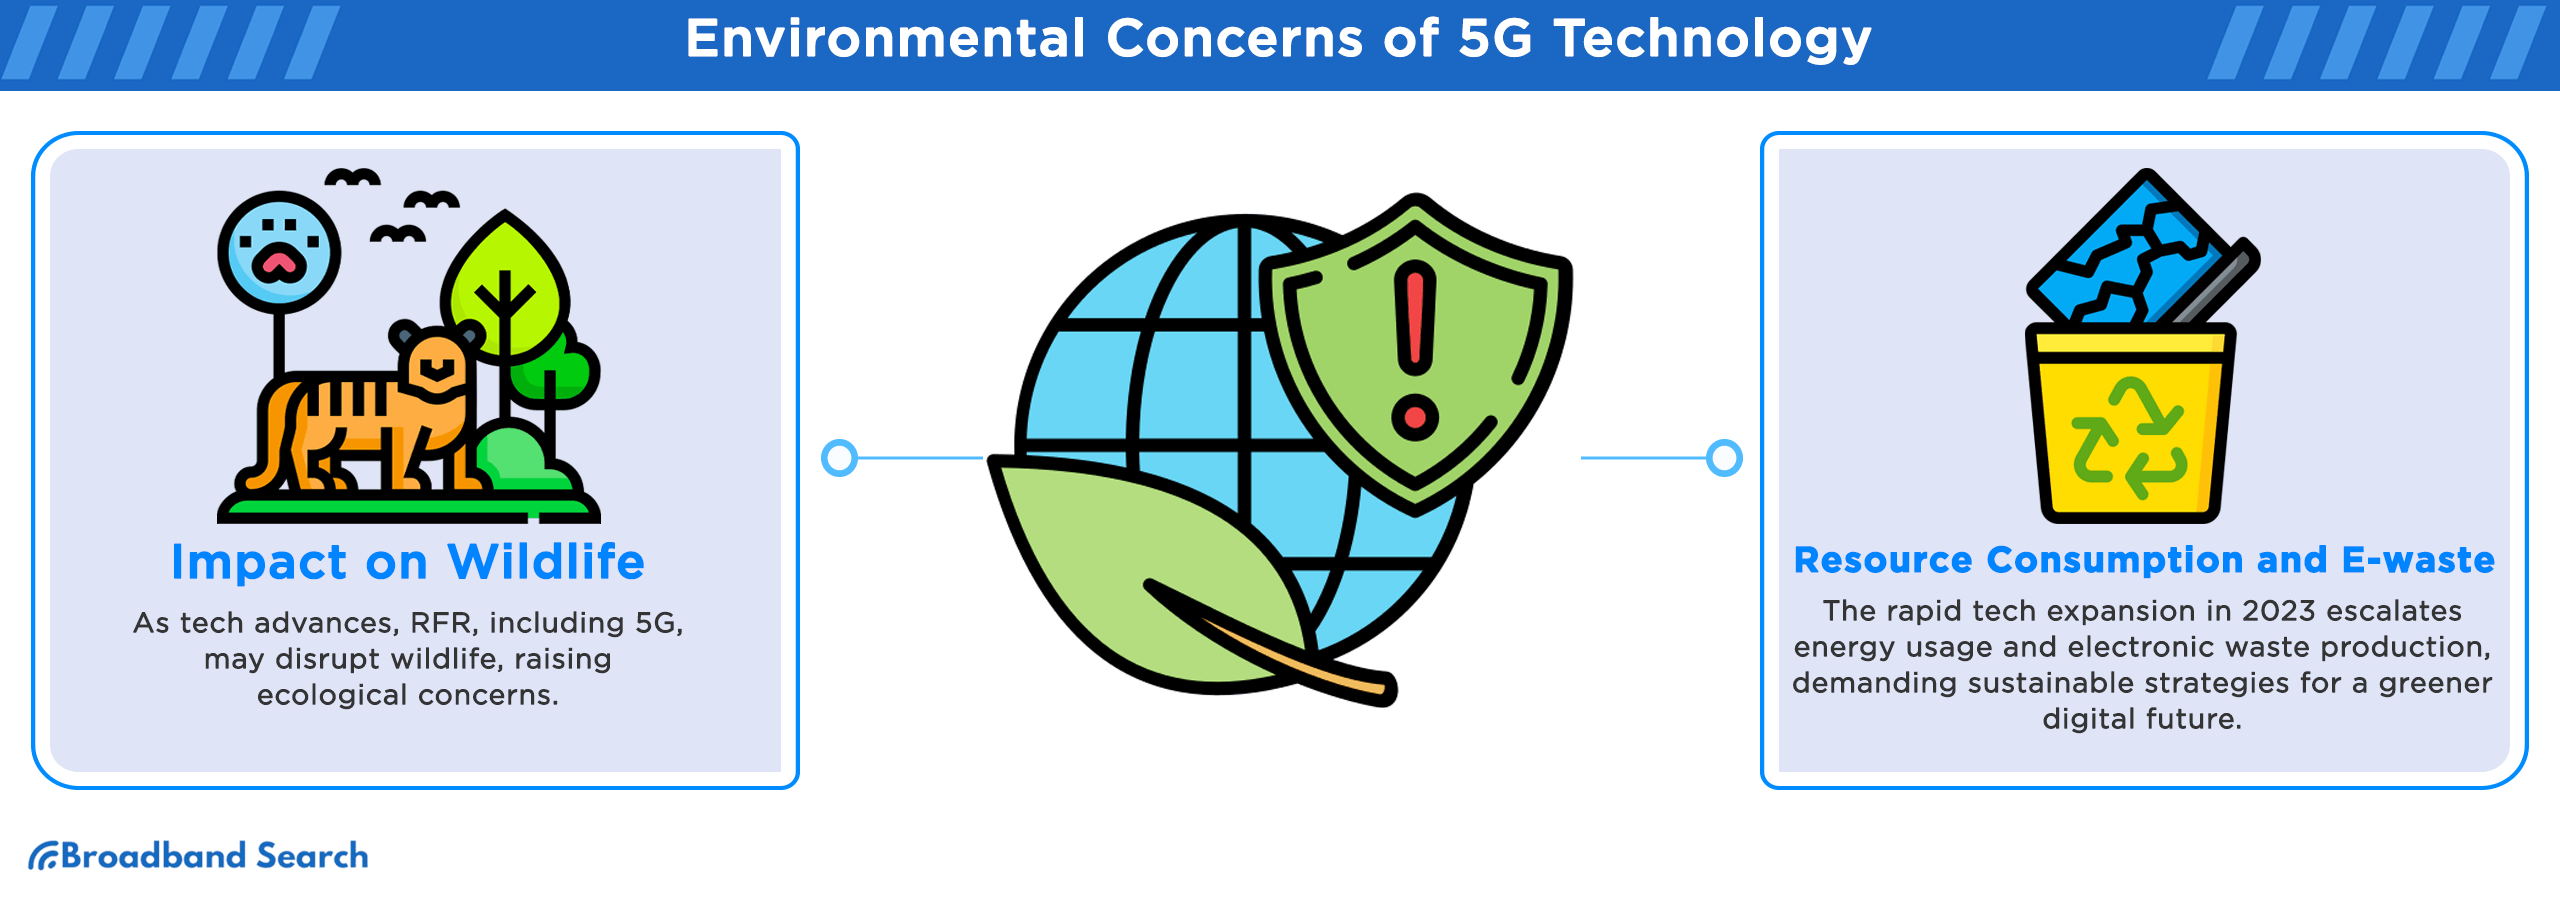 Environmental concerns of 5g technology